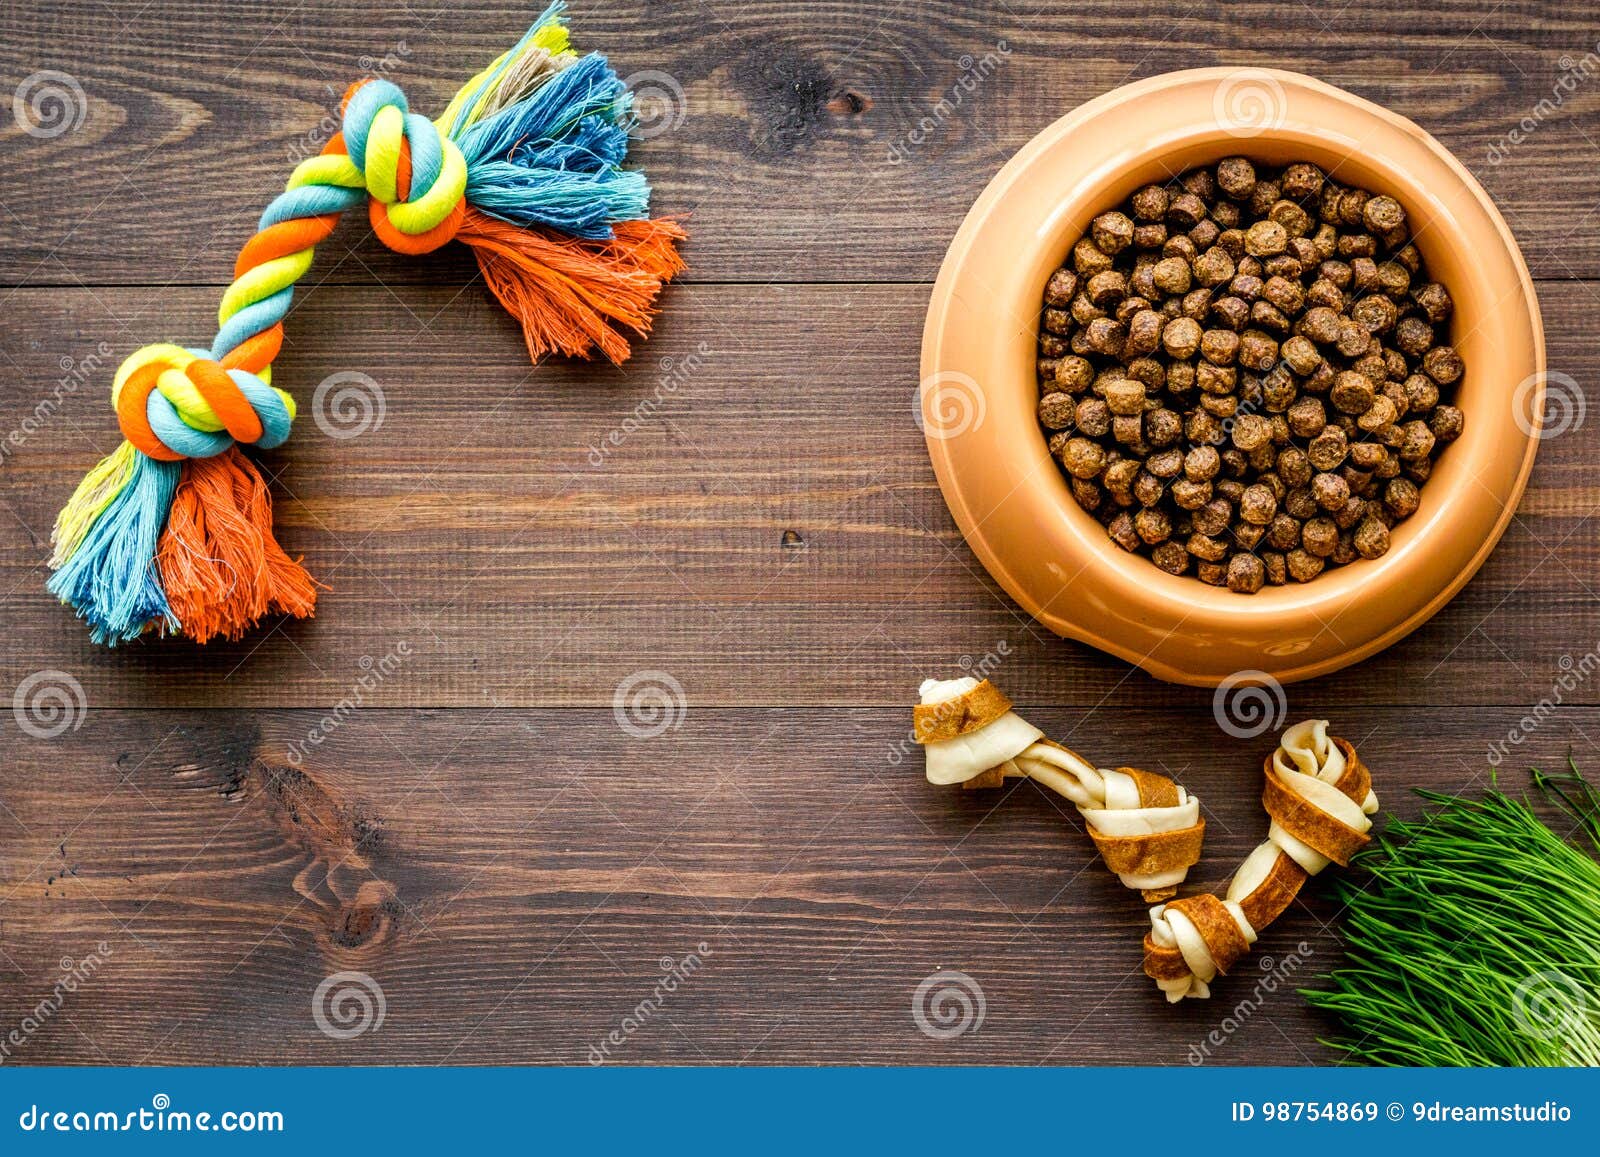 Download Large Bowl Of Pet - Dog Food With Toys On Wooden ...